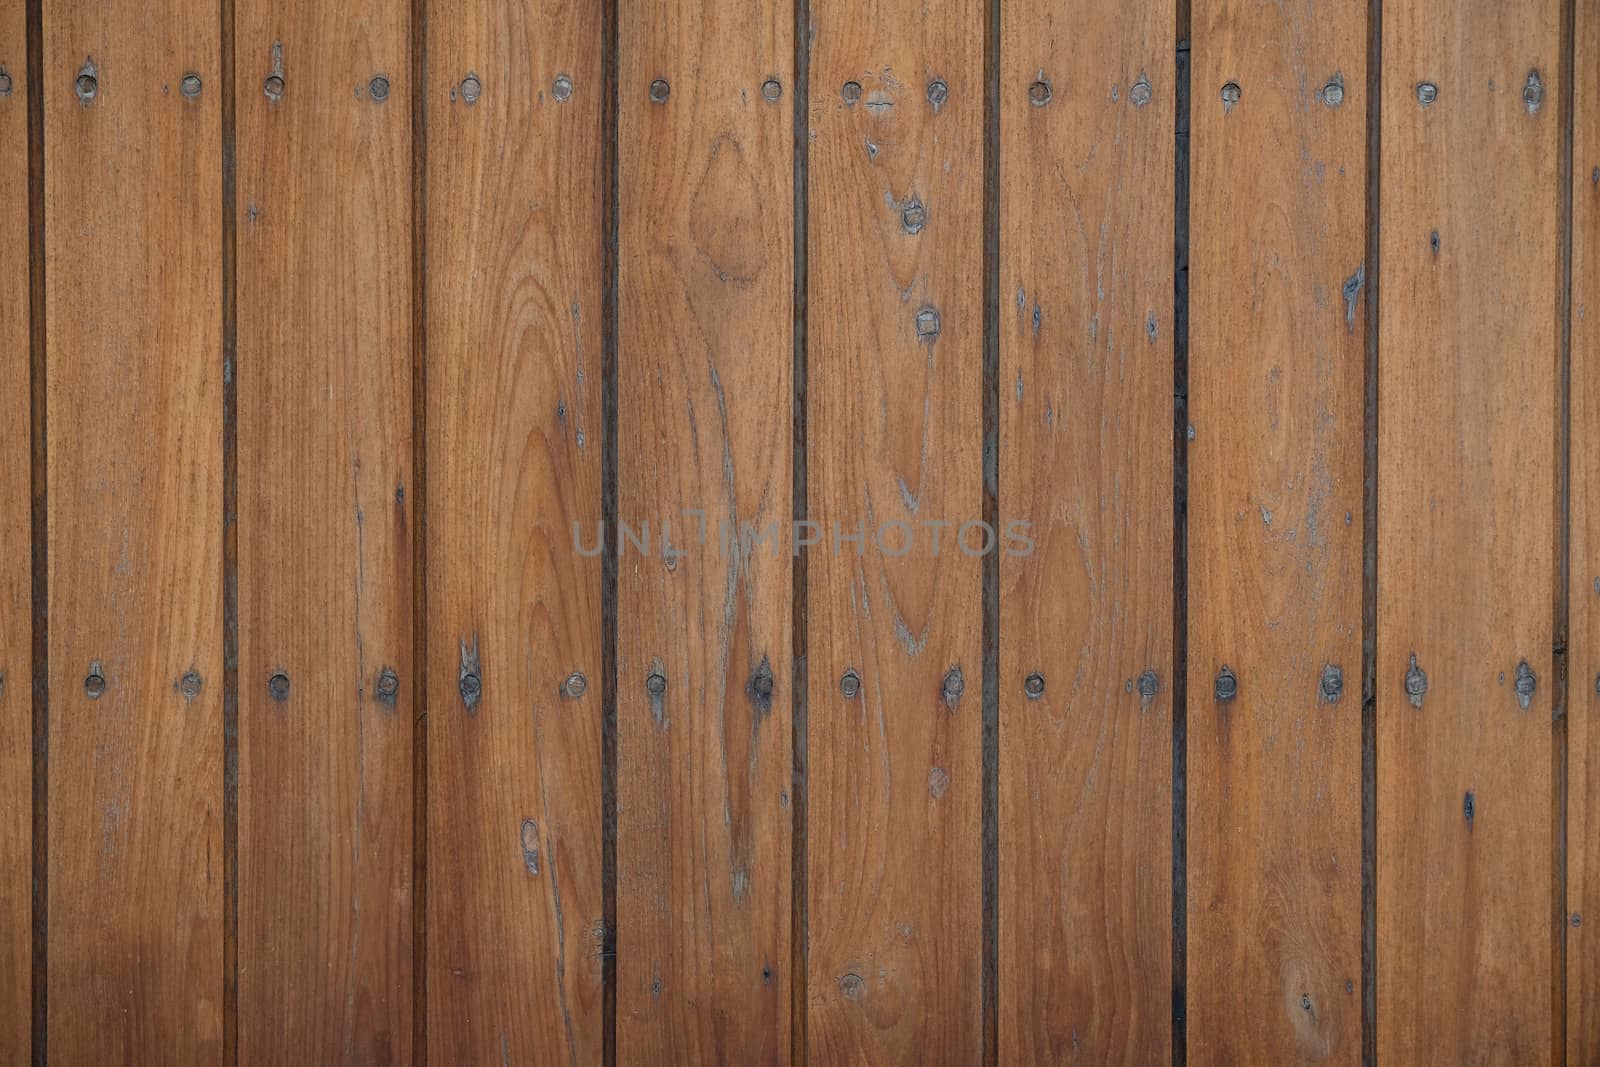 polished natural wood planks background with baeutiful grain pattern